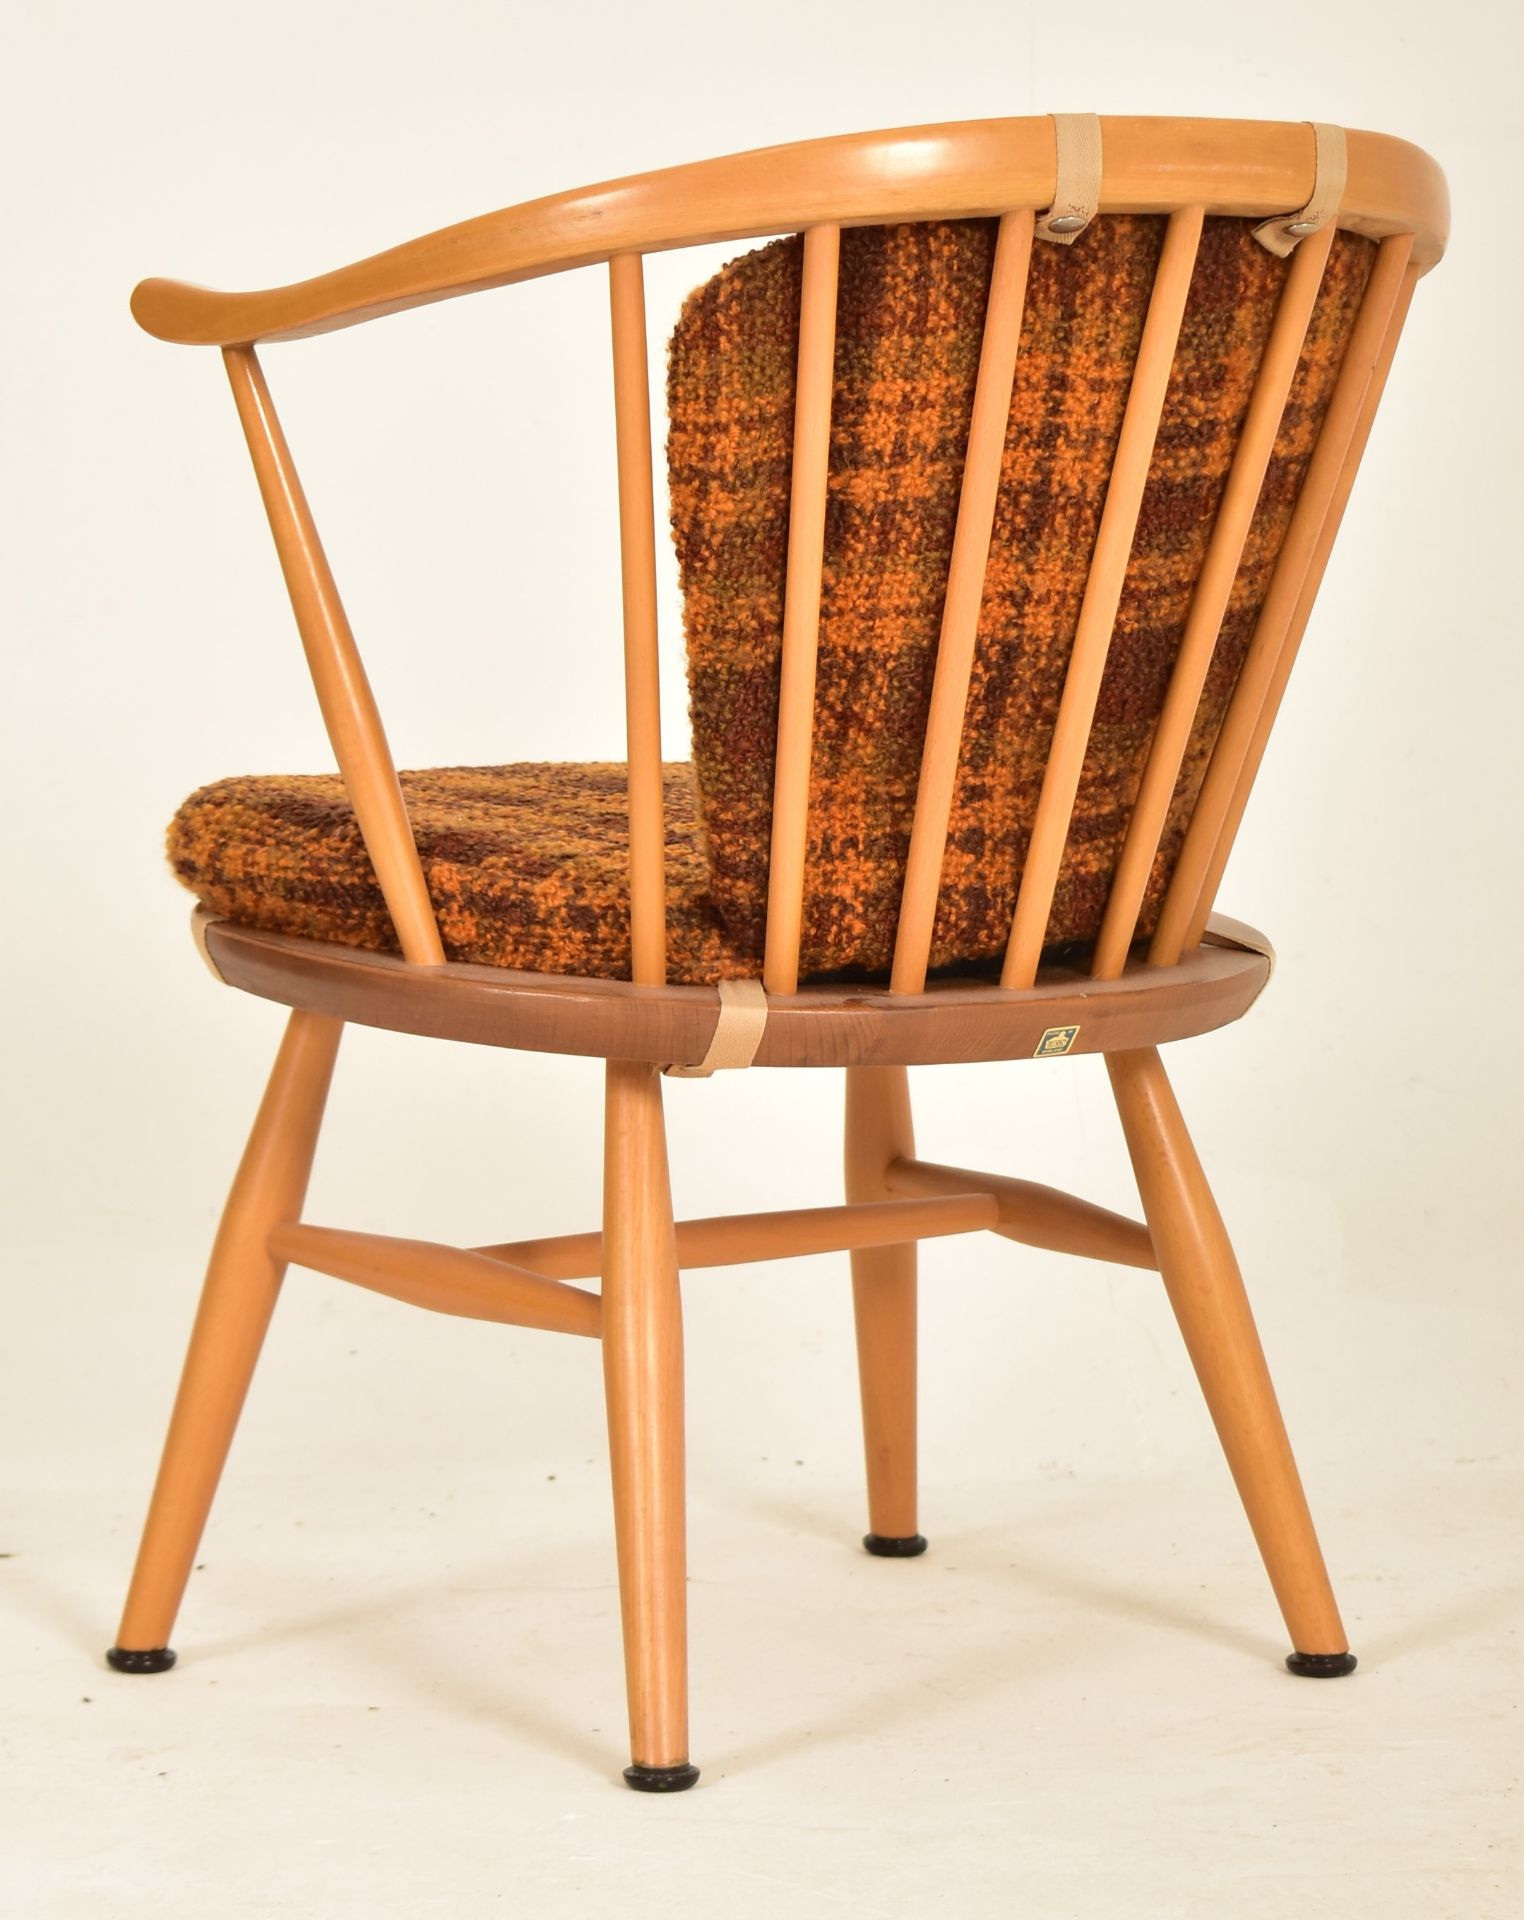 ERCOL - 333a - COW HORN - MID CENTURY BEECH & ELM CHAIR - Image 5 of 5